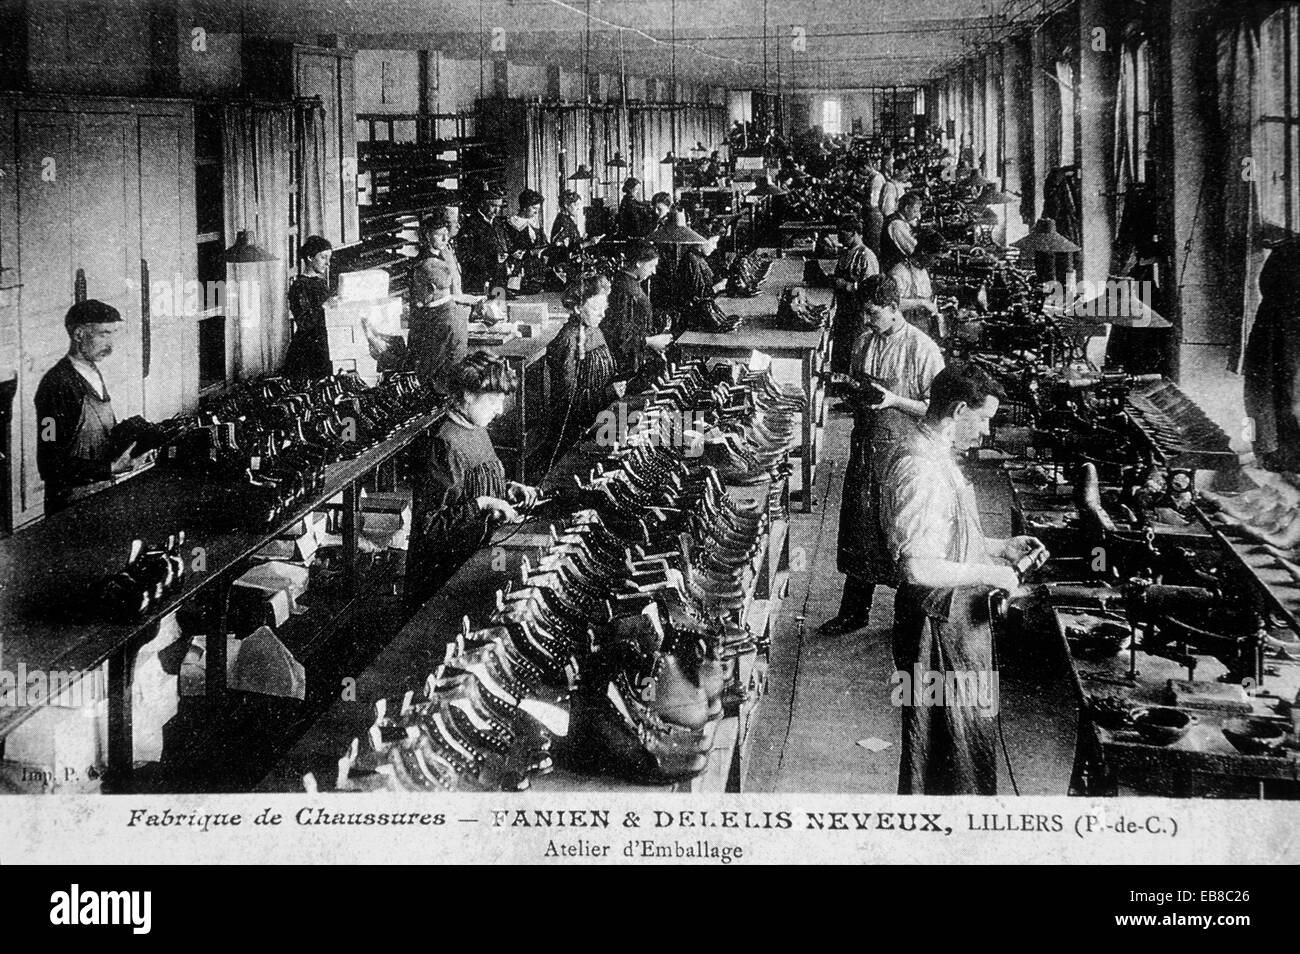 Old shoe factory Black and White Stock Photos & Images - Alamy